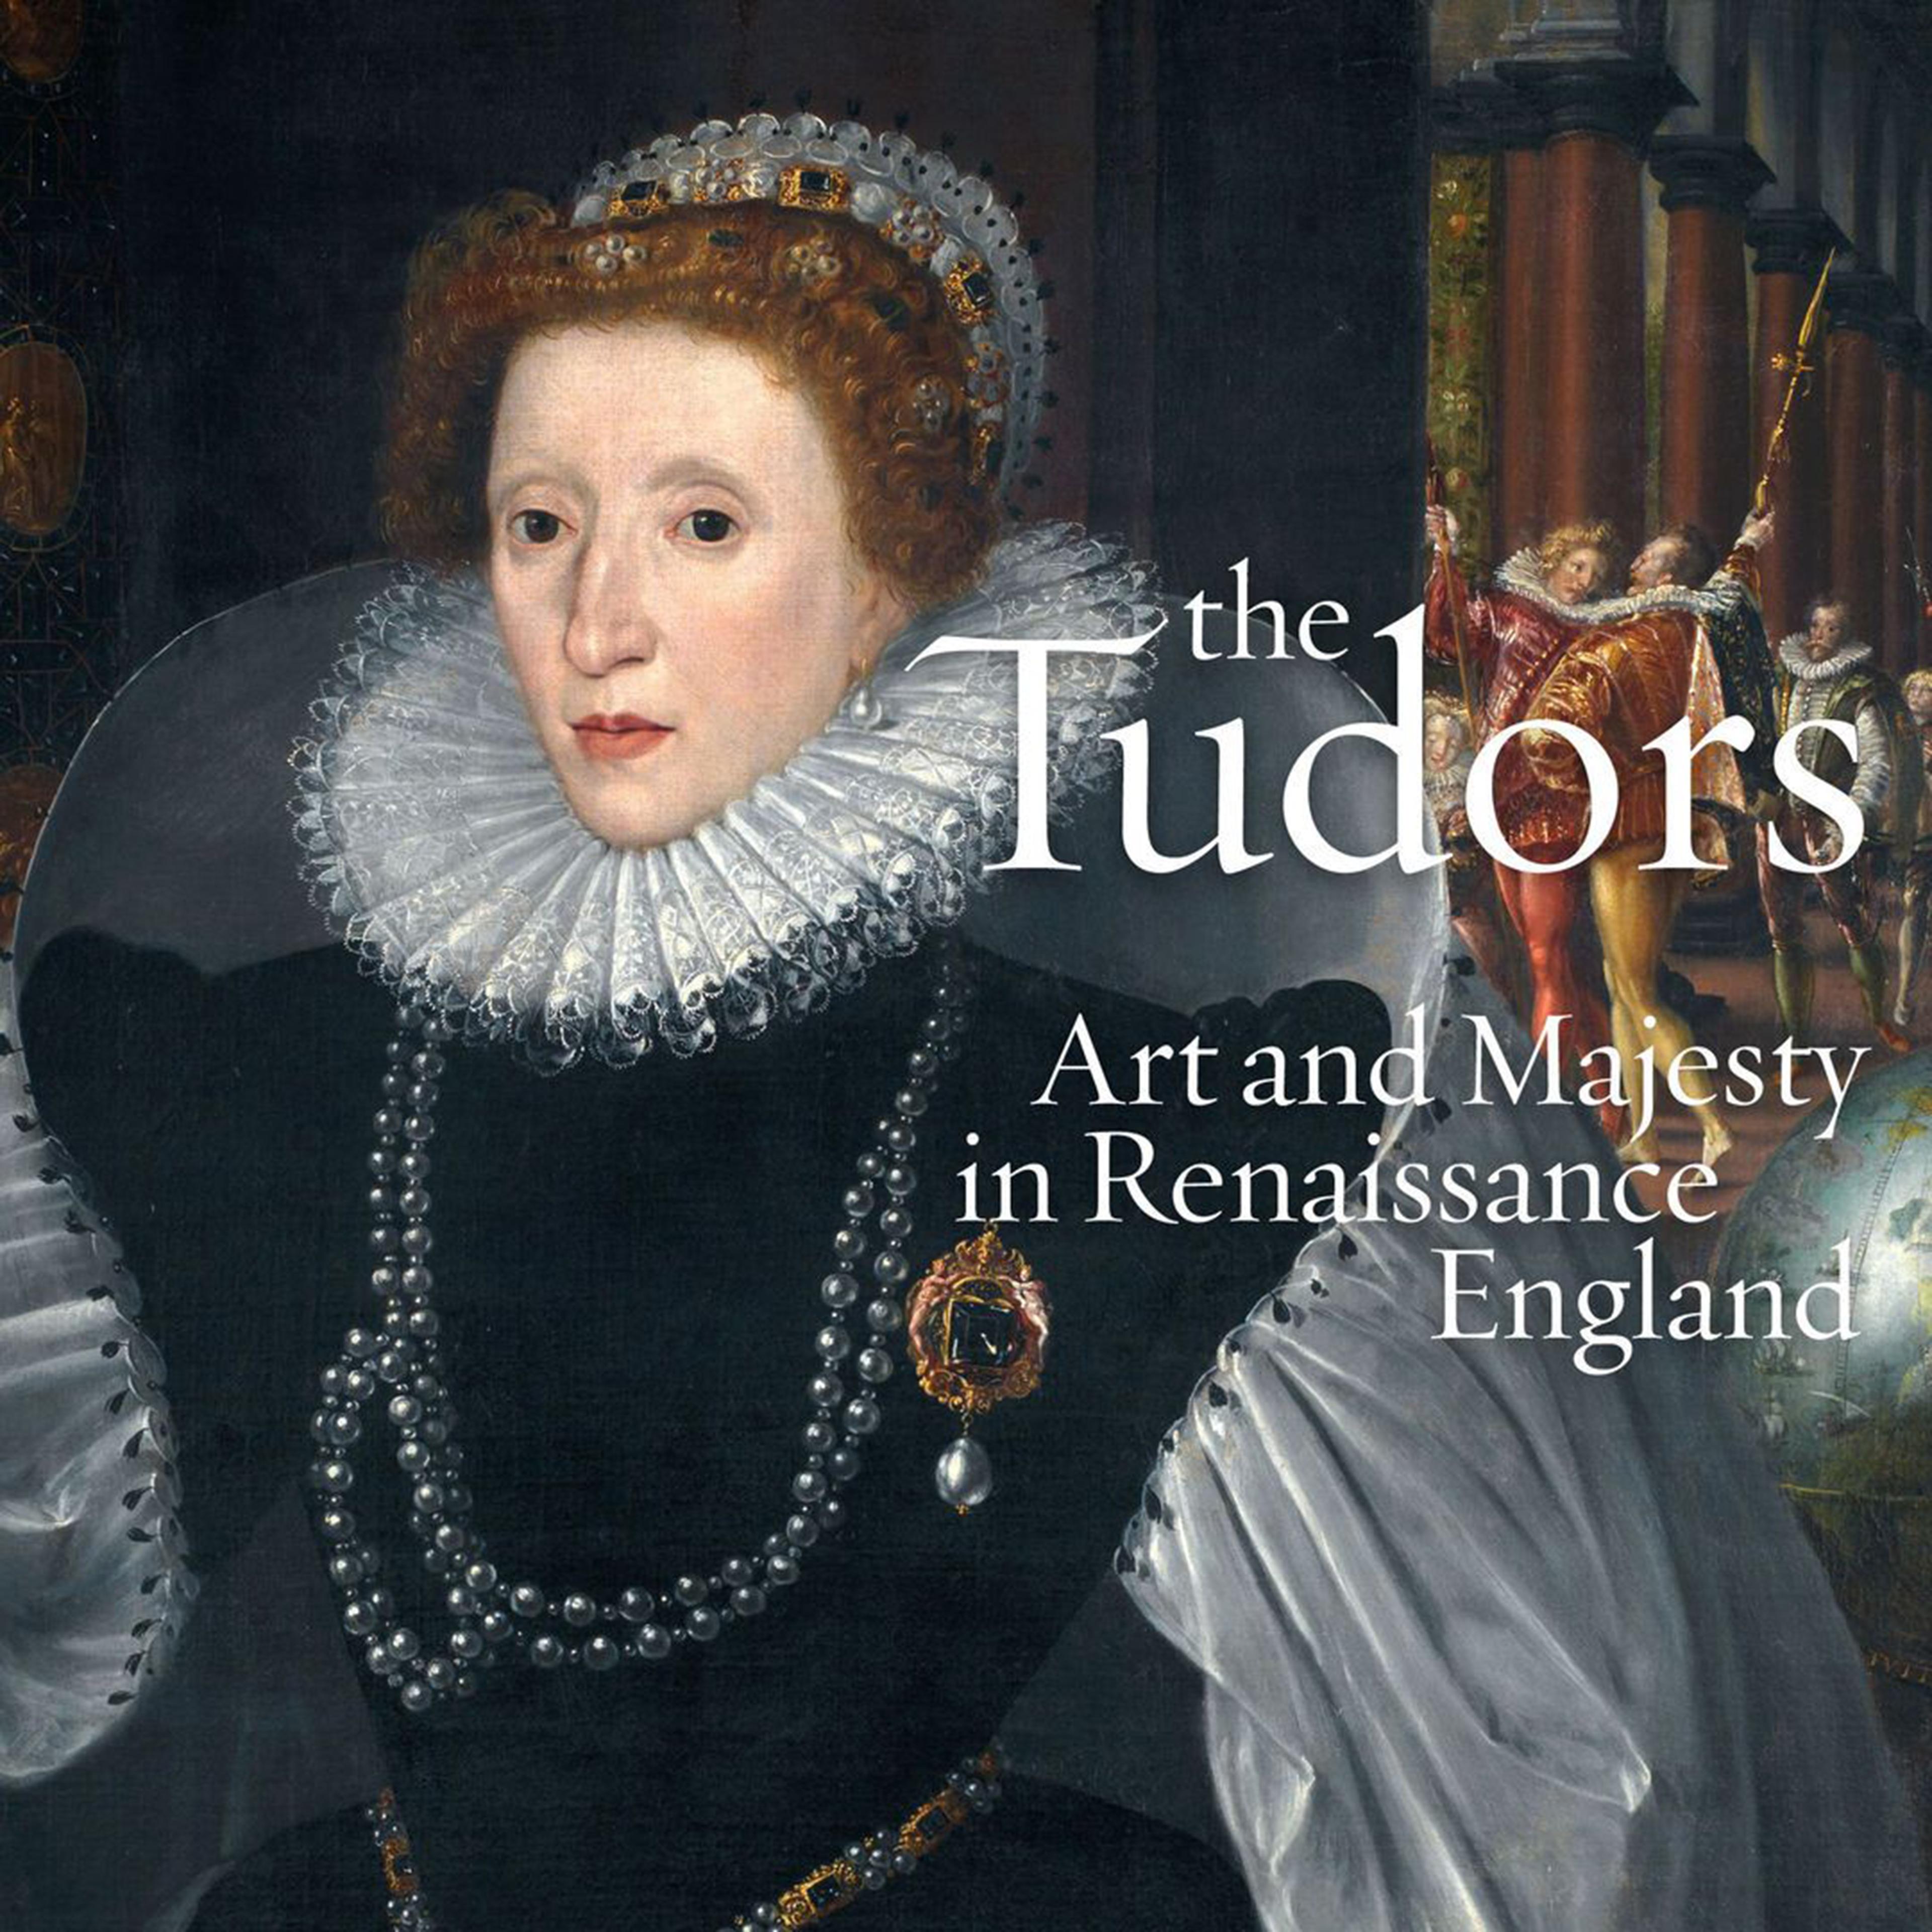 The Tudors Art and Majesty in Renaissance England